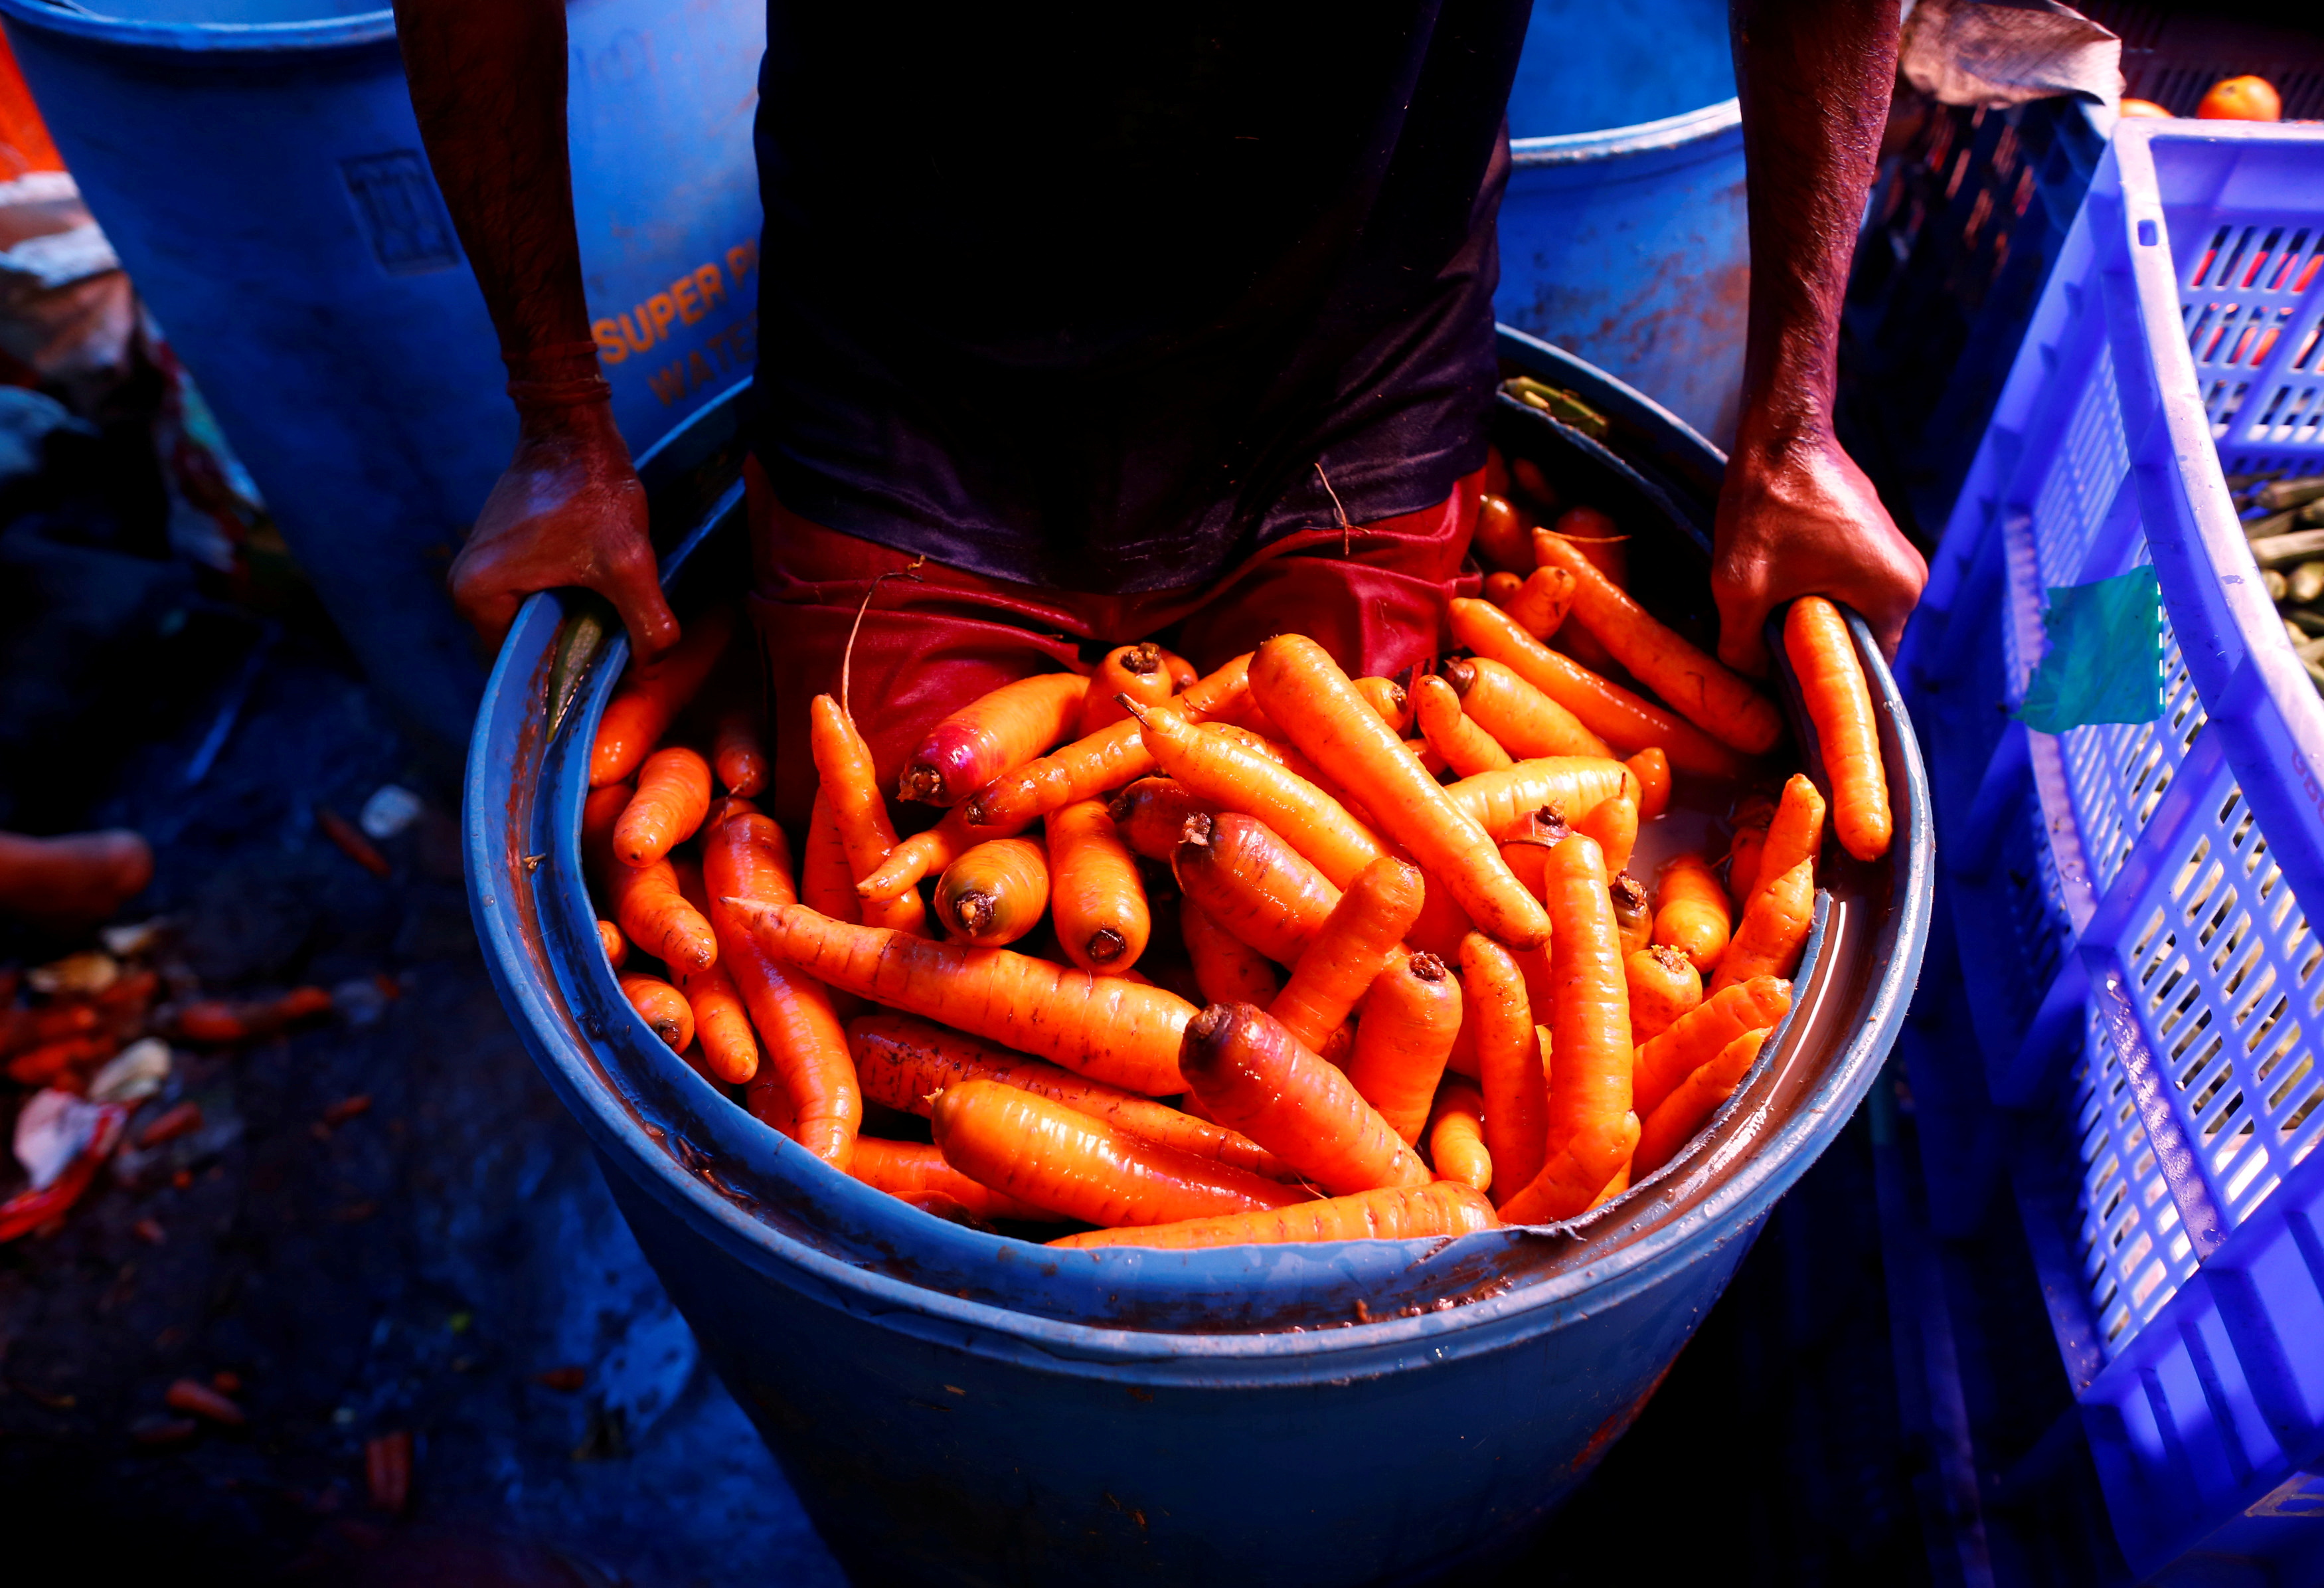 A worker washes carrots in a plastic drum at a wholesale vegetable market in Mumbai, India, June 14, 2016. REUTERS/Danish Siddiqui